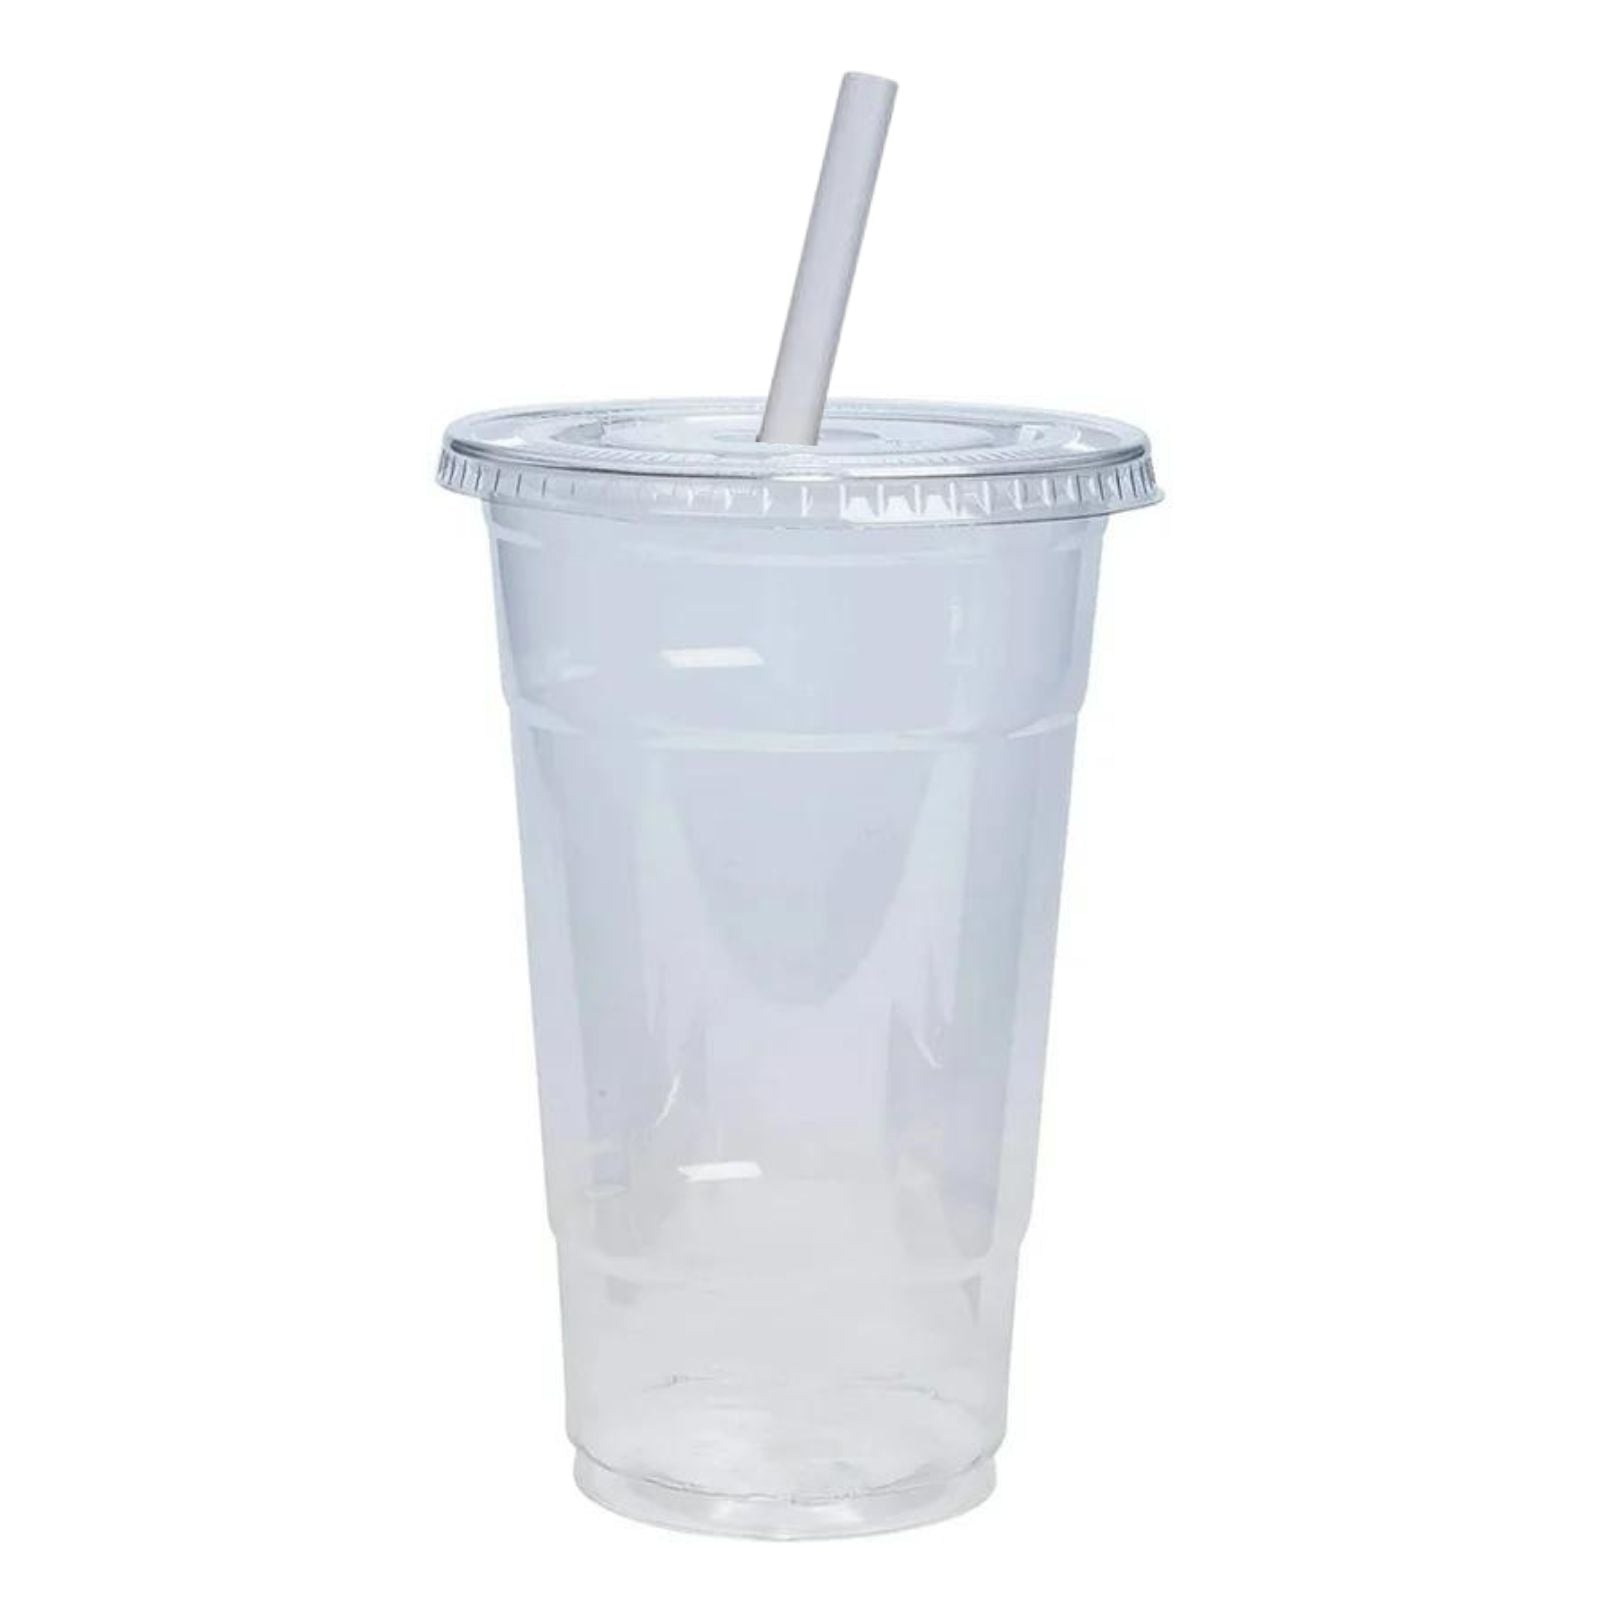 24oz Plastic Clear PET Cups With Flat Lid & Straw, for All Kinds of Beverages Smoothie Cups VeZee Cups/Lids/Straws 10 Pack 